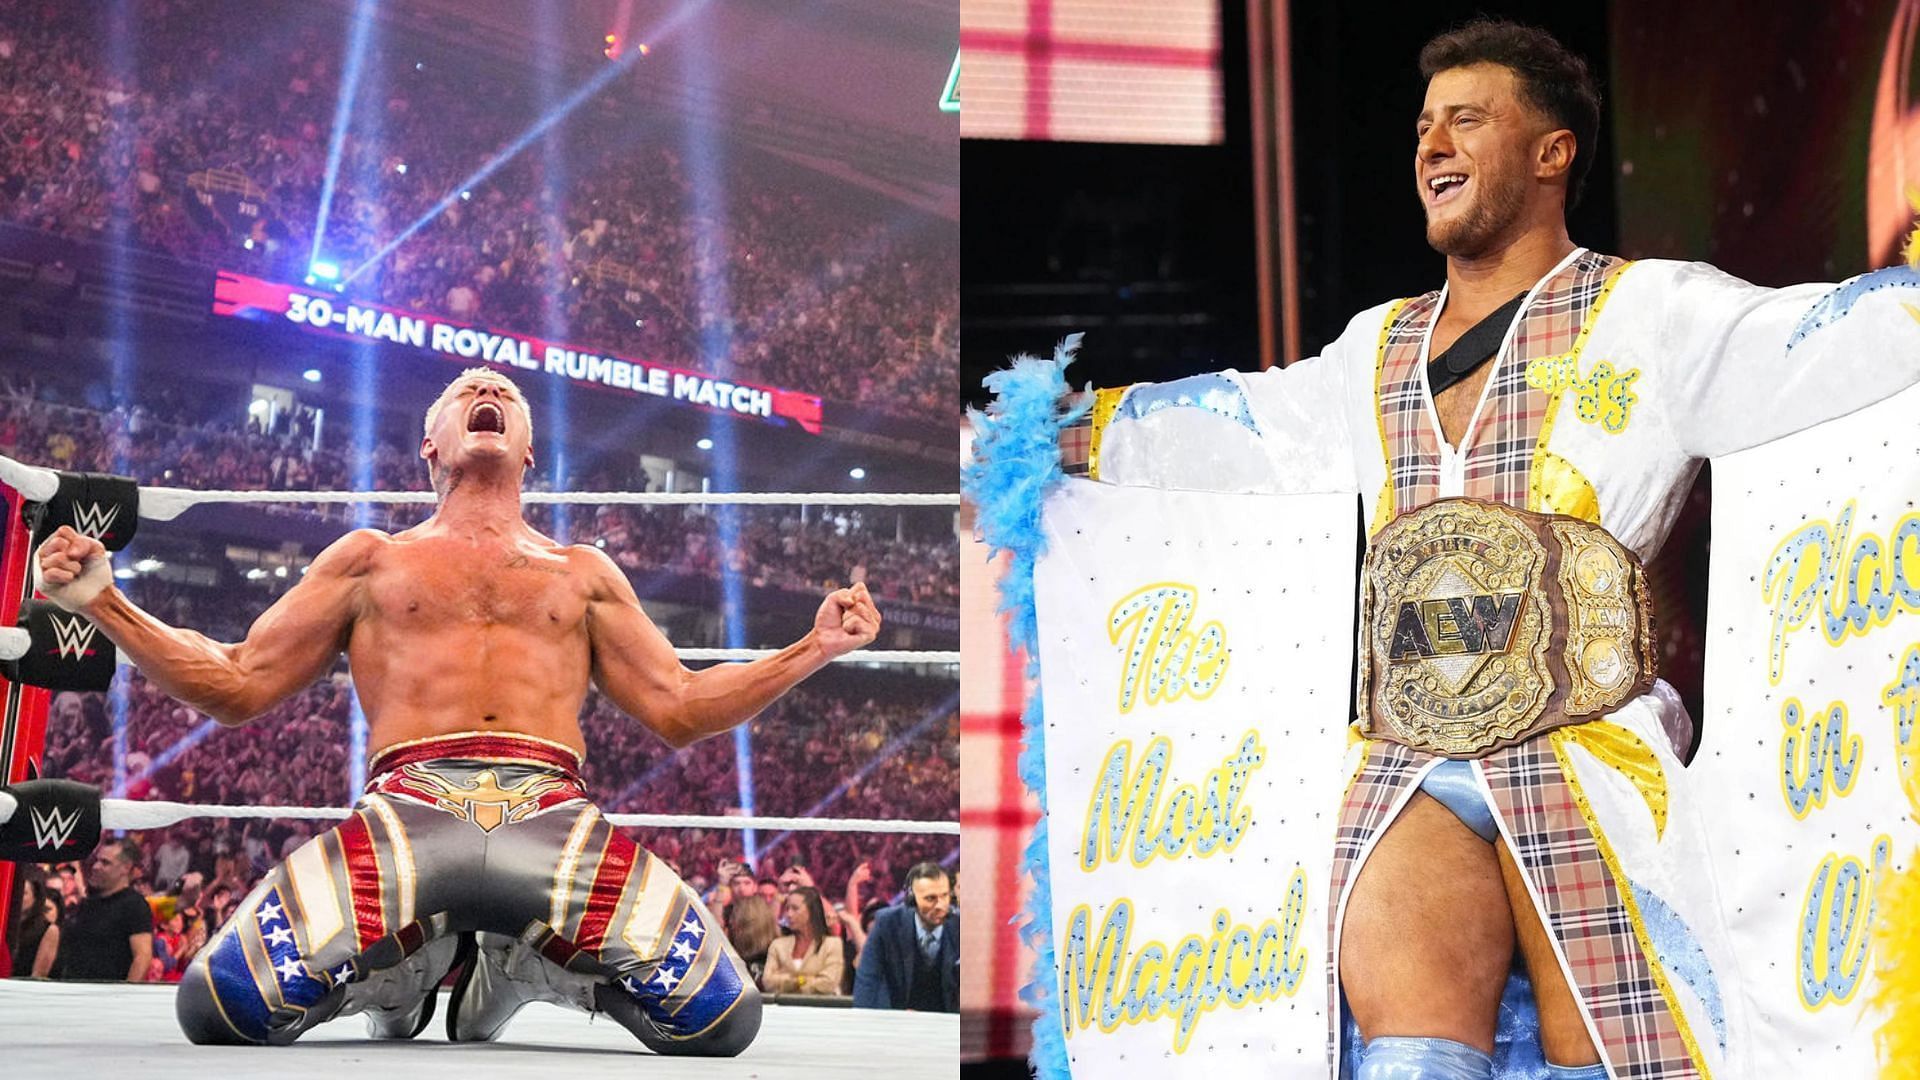 Cody Rhodes and MJF are top stars in WWE and AEW respectively